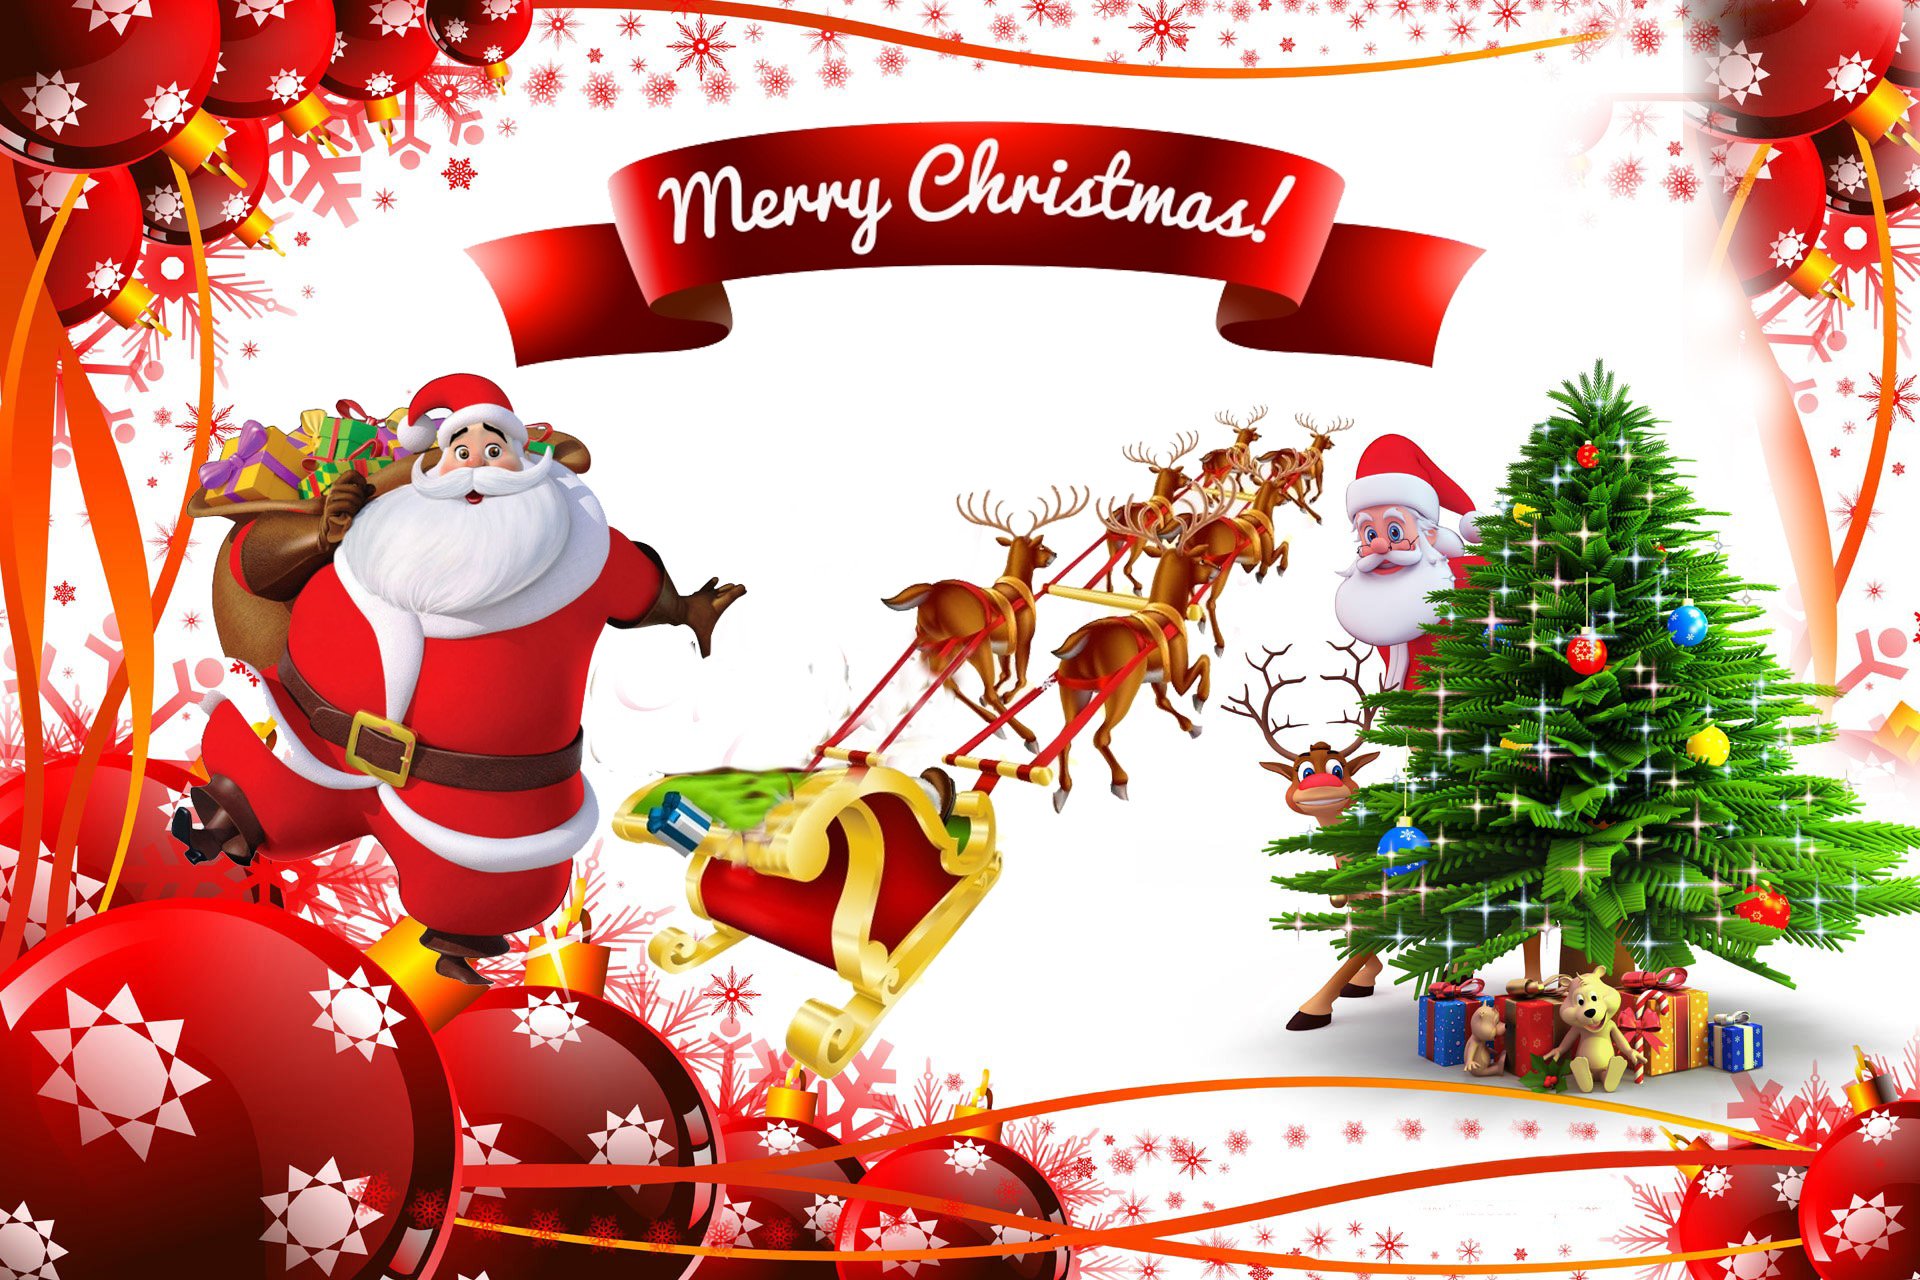 Merry Christmas Images 2019 Free Download